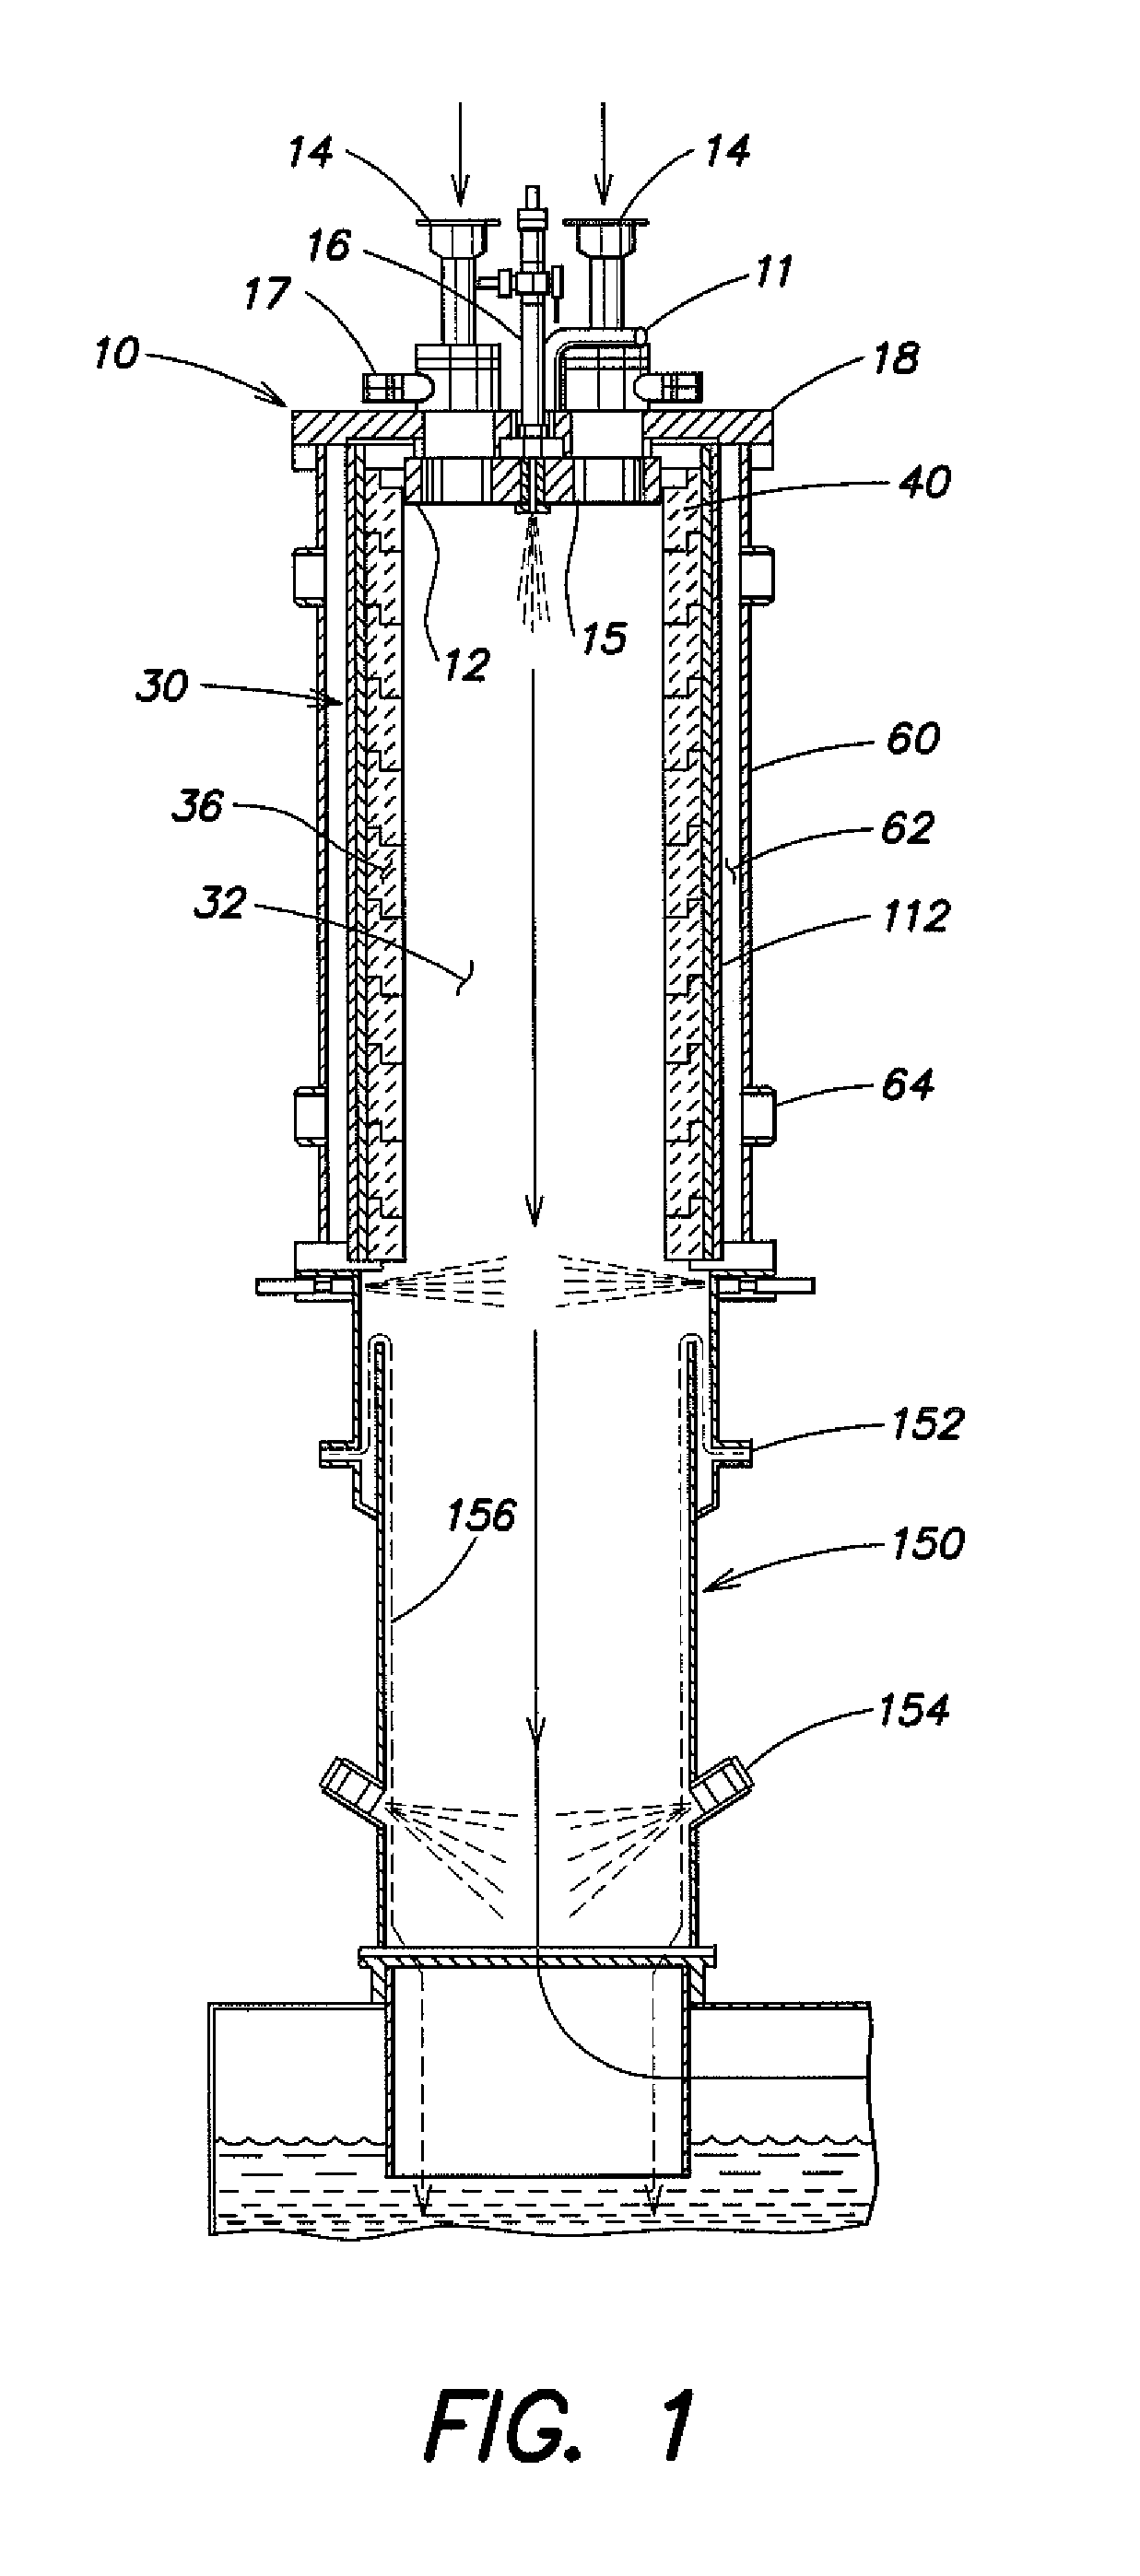 Methods and apparatus for preventing deposition of reaction products in process abatement reactors